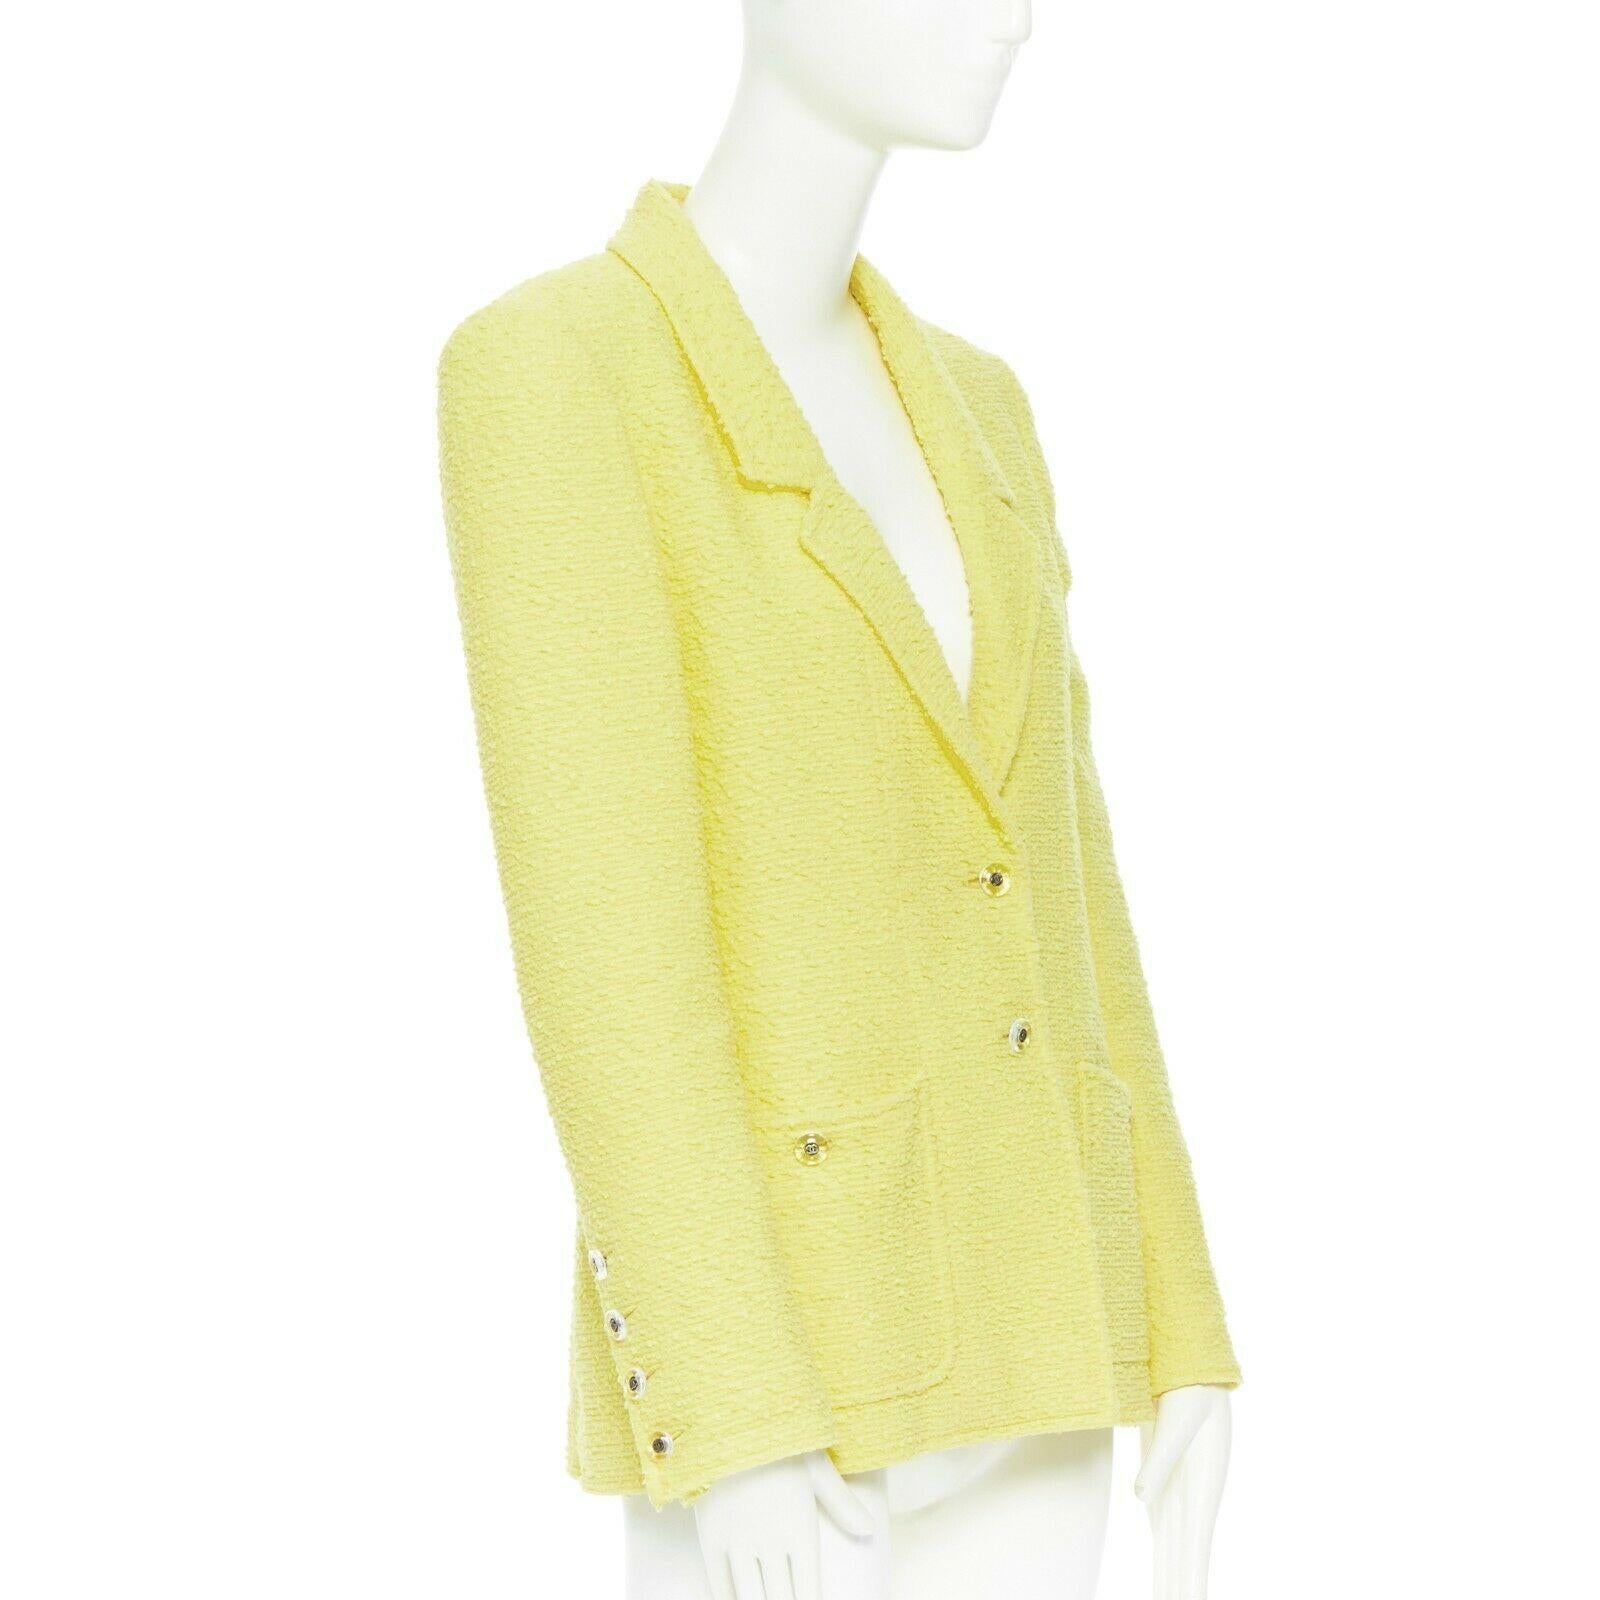 CHANEL 97C vintage baby yellow boucle tweed classic tailor blazer jacket FR40
Brand: CHANEL
Designer: Karl Lagerfeld
Collection: 97C
Model Name / Style: Tweed jacket
Material: Wool
Color: Yellow
Pattern: Solid
Closure: Button
Lining material: